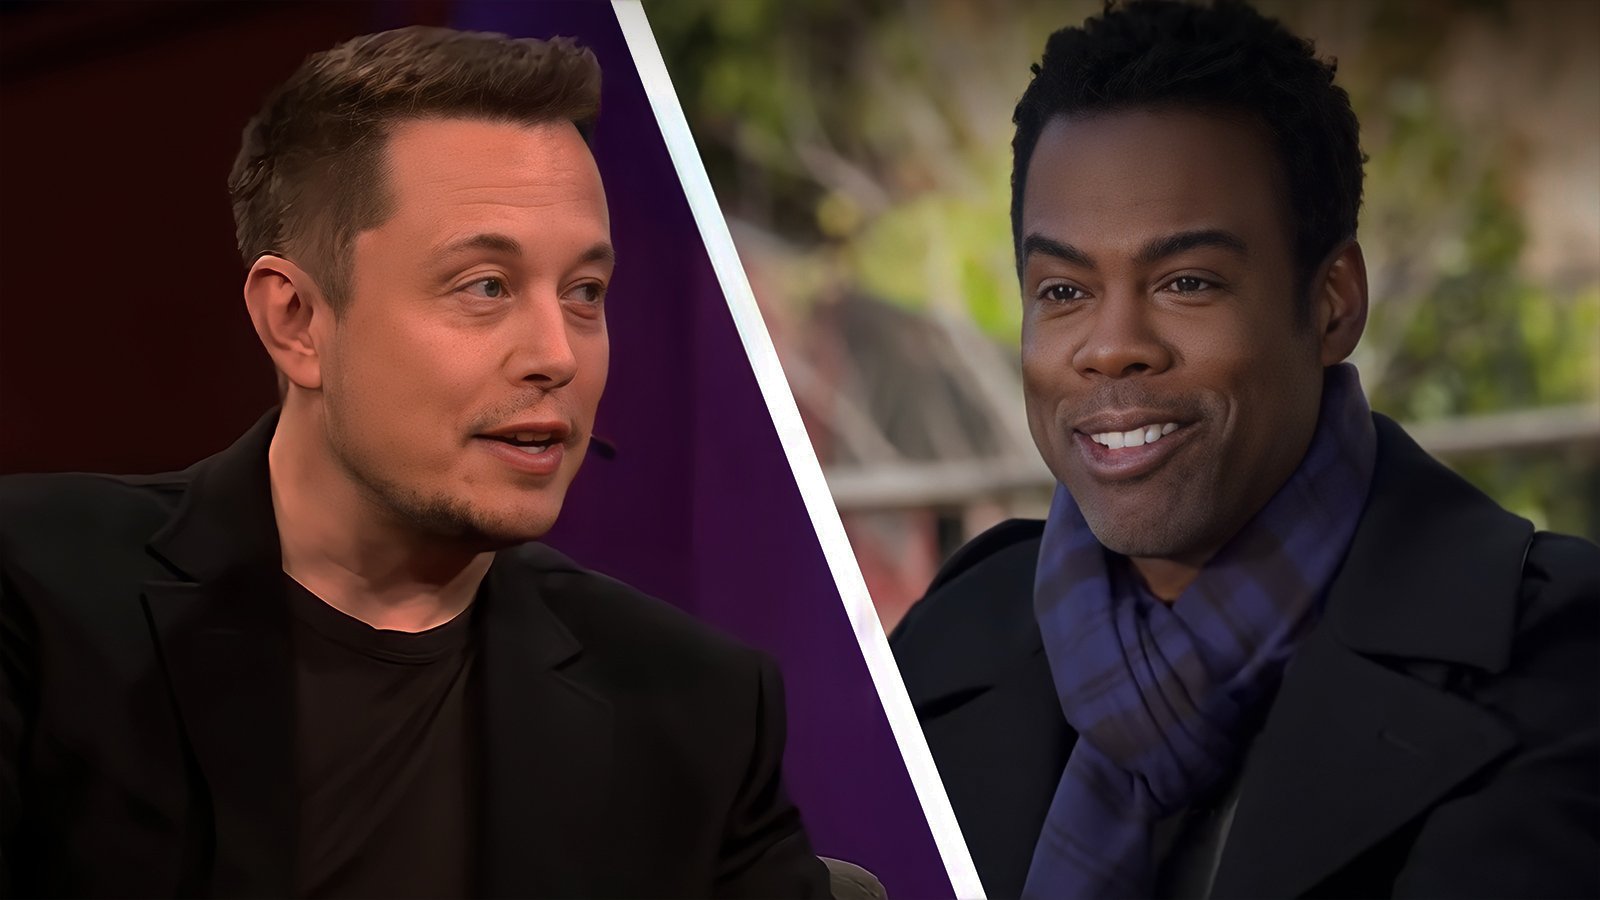 Will Musk Pump Dogecoin on TV Again? – He’s Invited to Chris Rock’s Show